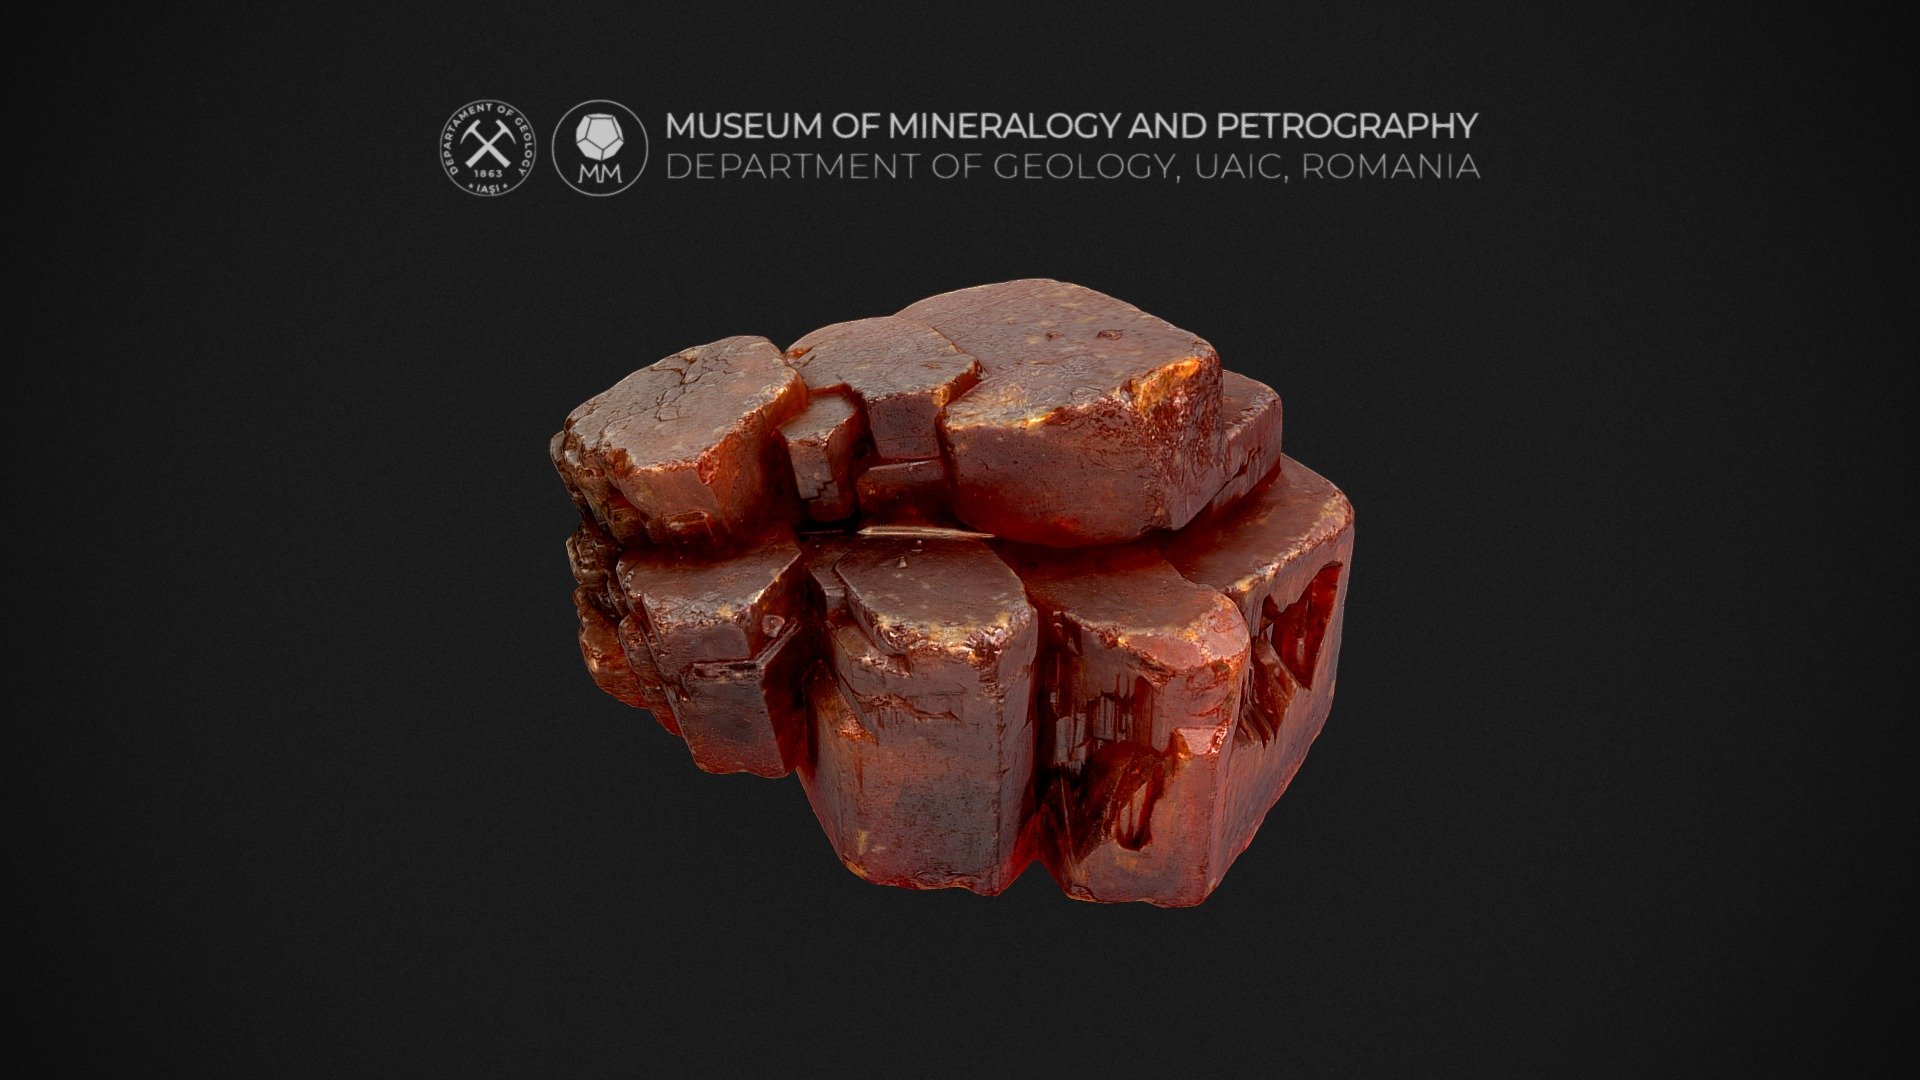 Size: 1 x 1 x 1 cm

Formula: Pb5(VO4)3Cl

Description: This model represents a floater specimen with stacked blocky Vanadinite crystals (short-prismatic hexagonal crystals).  The cluster is nearly equant (1 cm across), doubly-terminated, adamantine luster, and reddish to deep-orange in color. The prismatic faces are incredibly lustrous while the basal faces are a little less so.

Vanadinite is an important ore of vanadium (V) and a minor source of the lead (Pb). Vanadinite usually forms where lead minerals are oxidized (as secondary mineral), often in areas with an arid climate. It is commonly associated with the oxidation of galena.



Website: http://geology.uaic.ro/muzee/mineralogie/

Concept &amp; 3D-modelling by Andrei Ionut APOPEI
 - V is for Vanadinite - 3D model by Museum of Mineralogy and Petrography, UAIC (@MineralogyPetrographyMuseum) 3d model